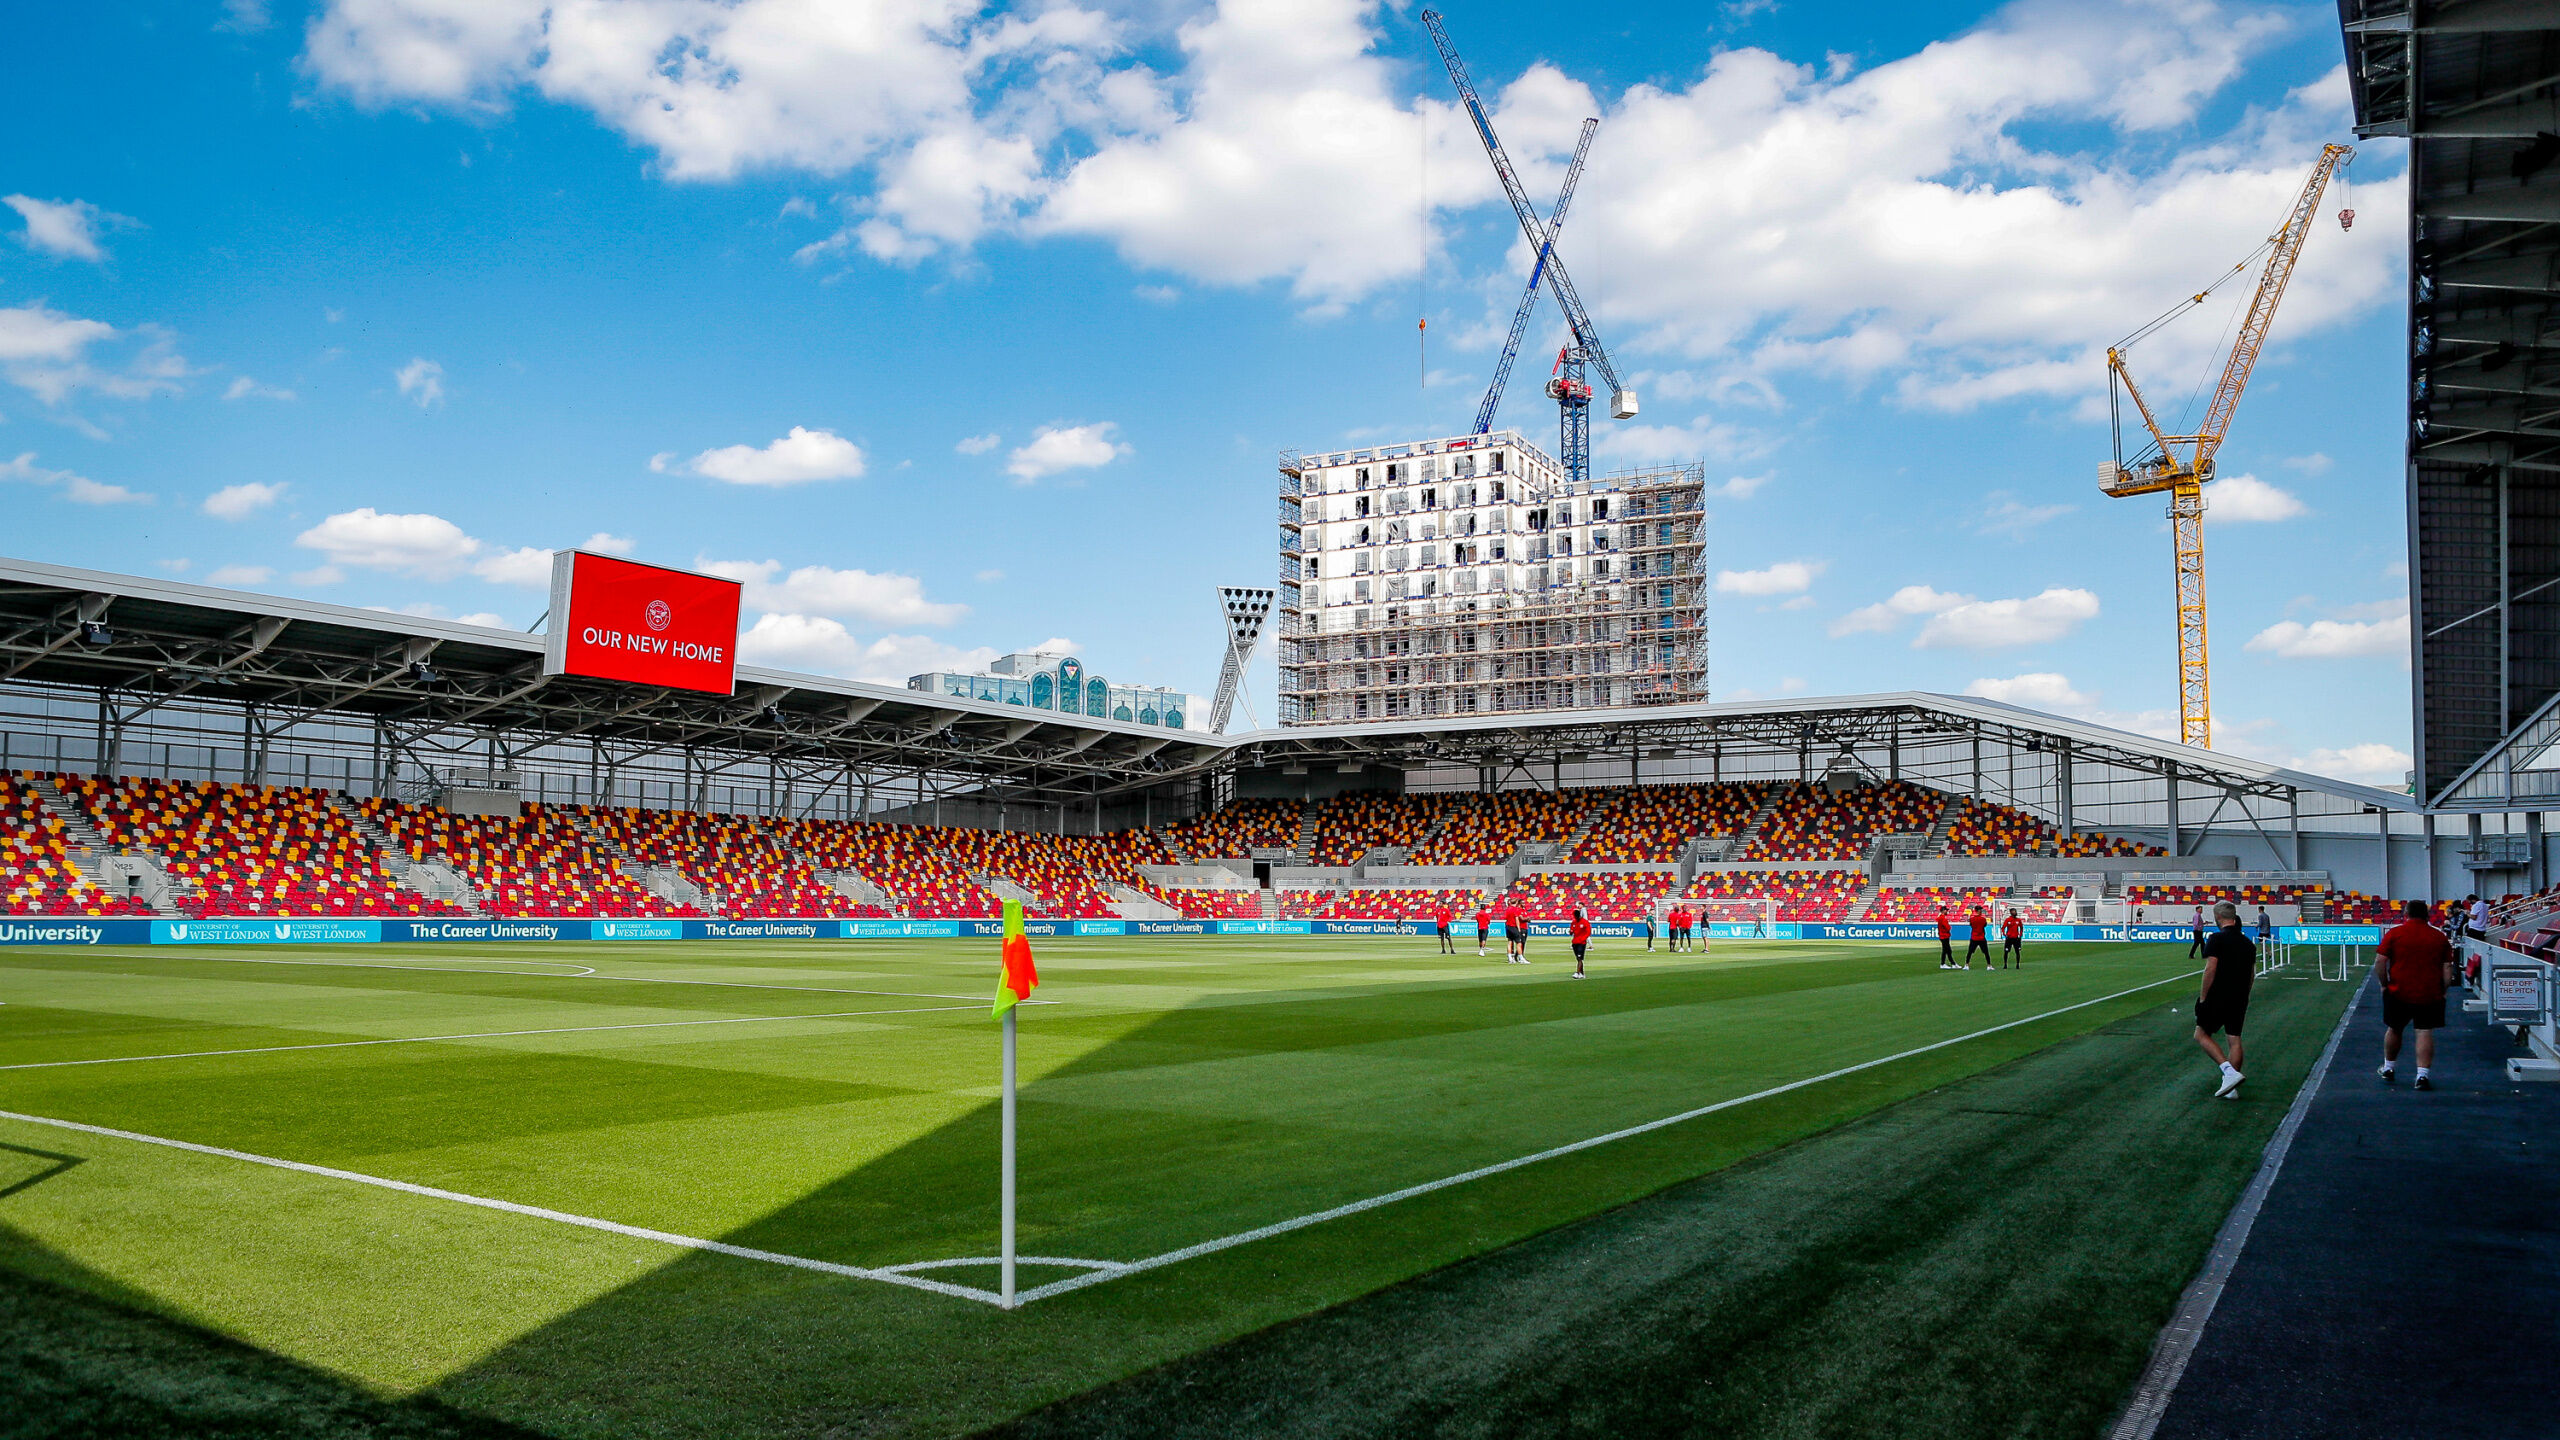 Brentford’s new stadium may not be Griffin Park but a bright future